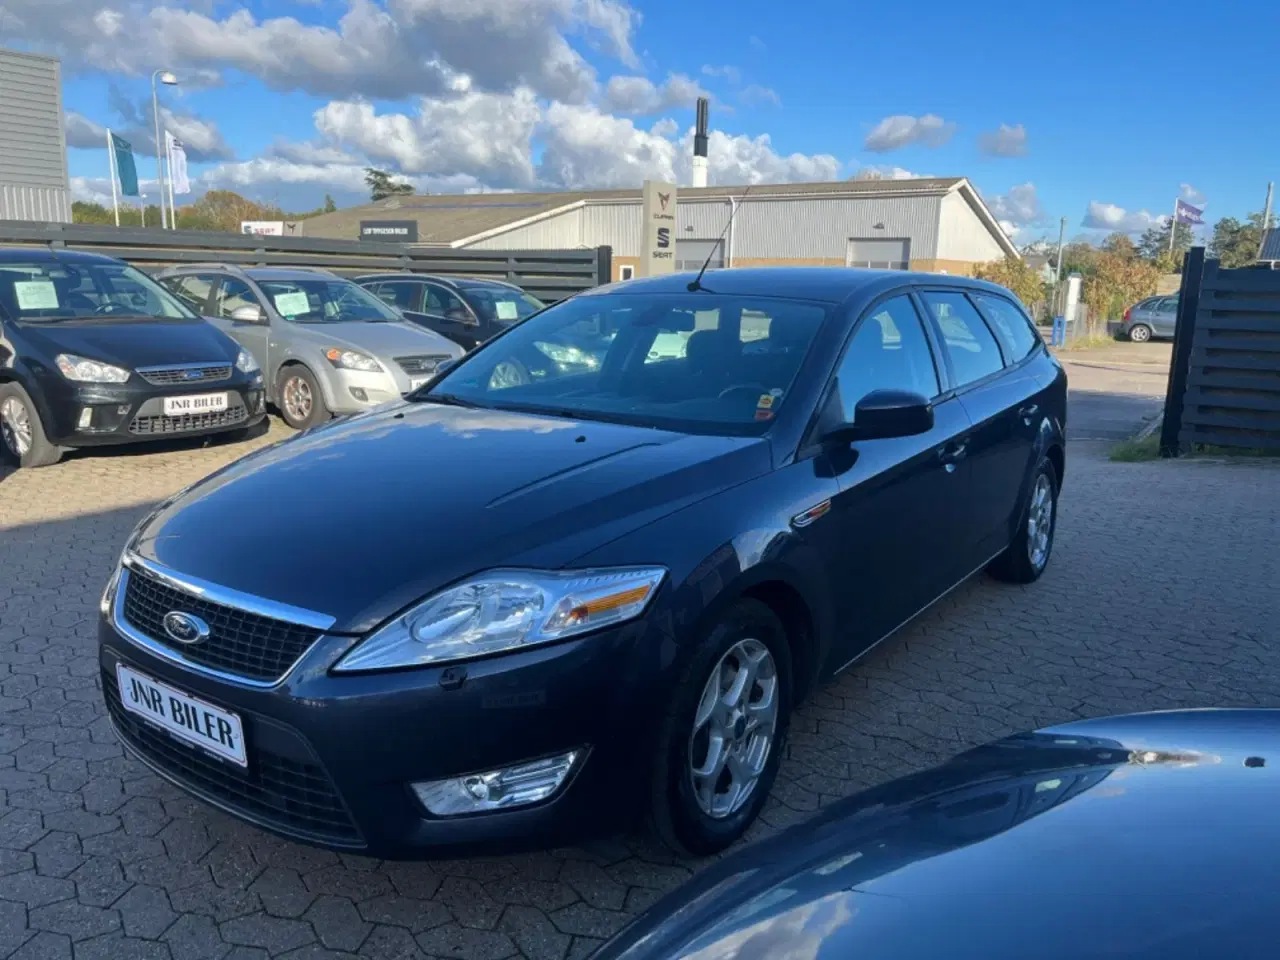 Billede 14 - Ford Mondeo 2,0 TDCi 115 Collection stc. ECO